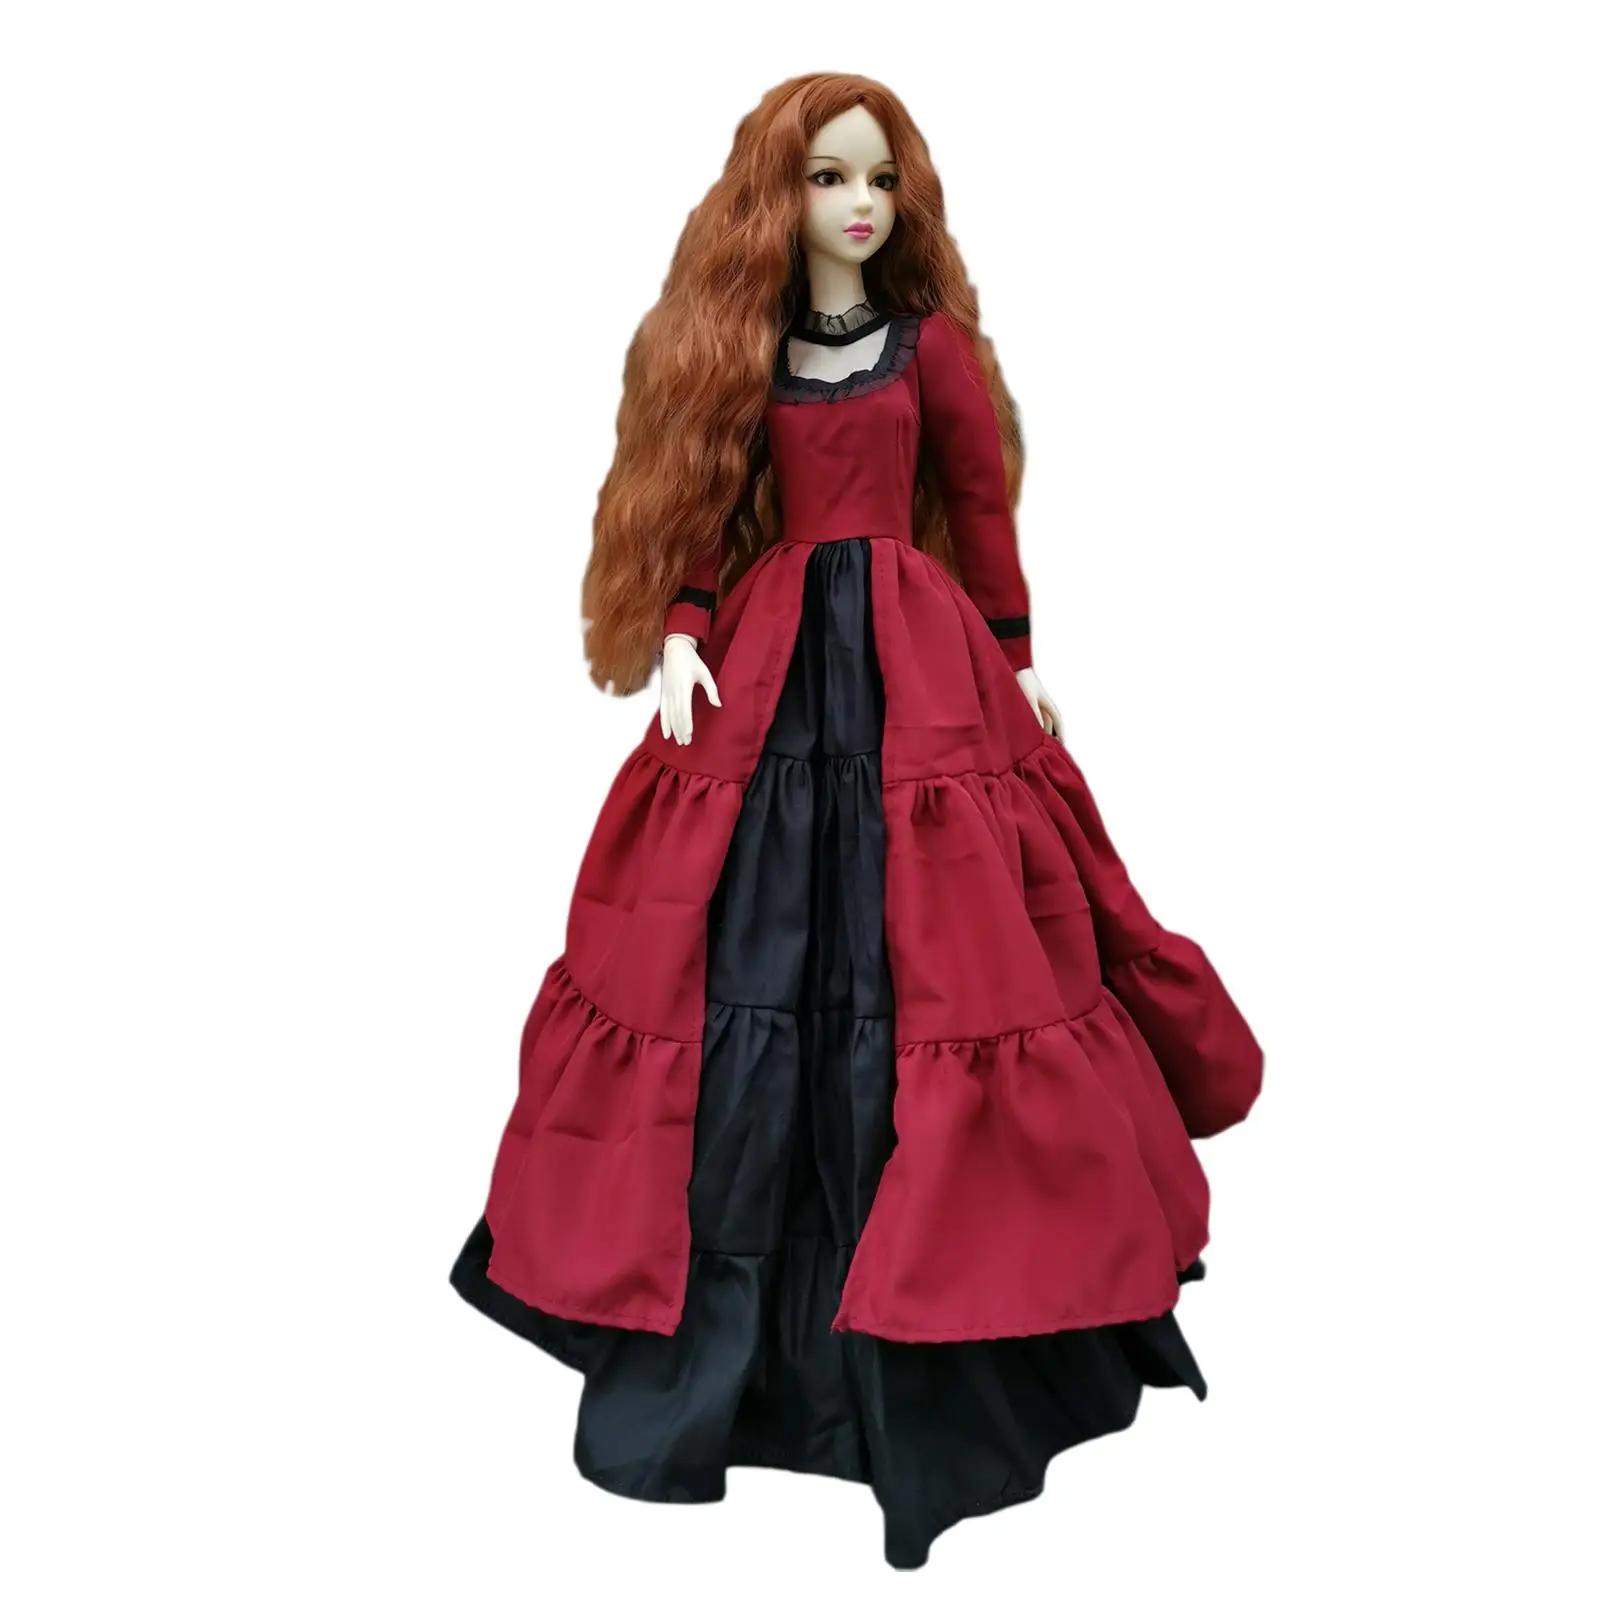 Ball Jointed Doll 1/3 Dolls Easy to Pose with Beautiful Doll Clothes and Doll Action Figures for Women